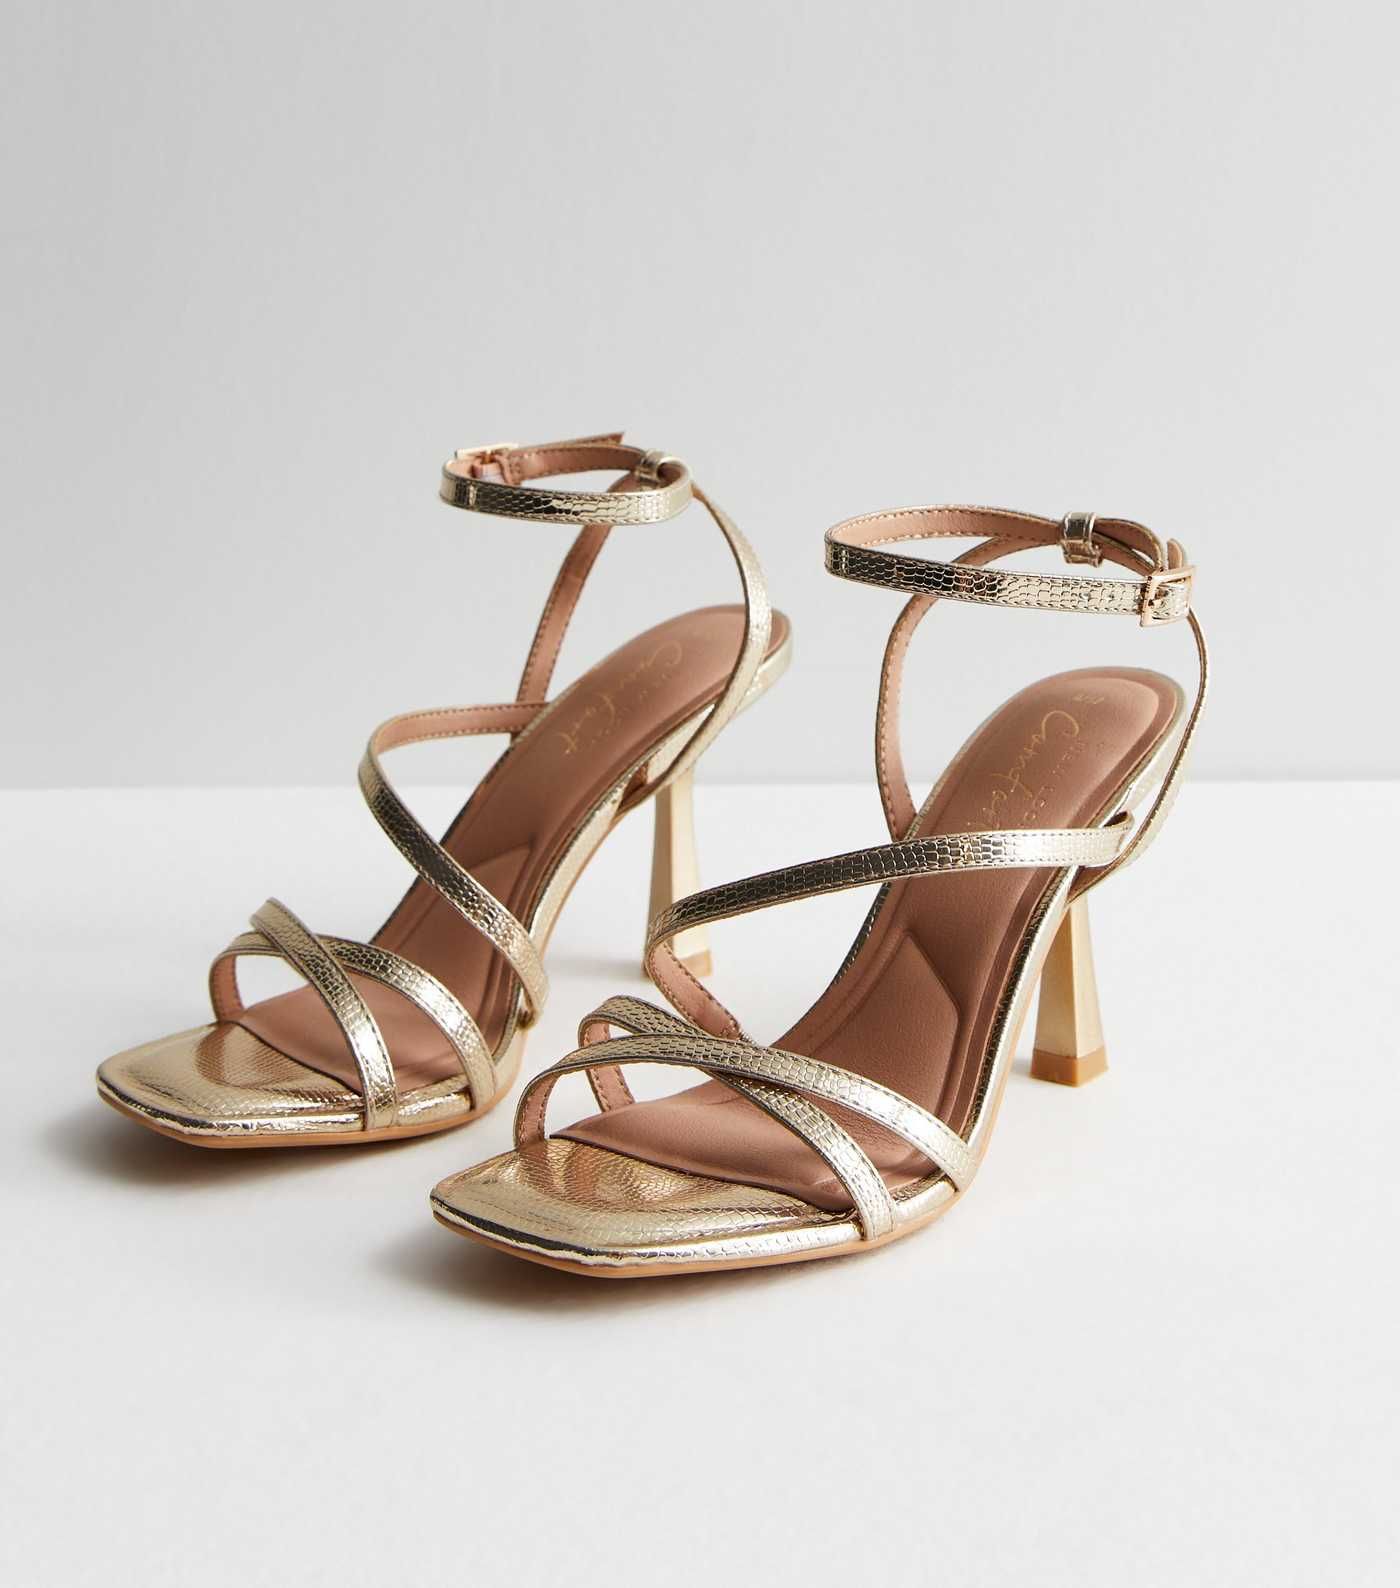 Gold Strappy Stiletto Heel Sandals
						
						Add to Saved Items
						Remove from Saved Items | New Look (UK)